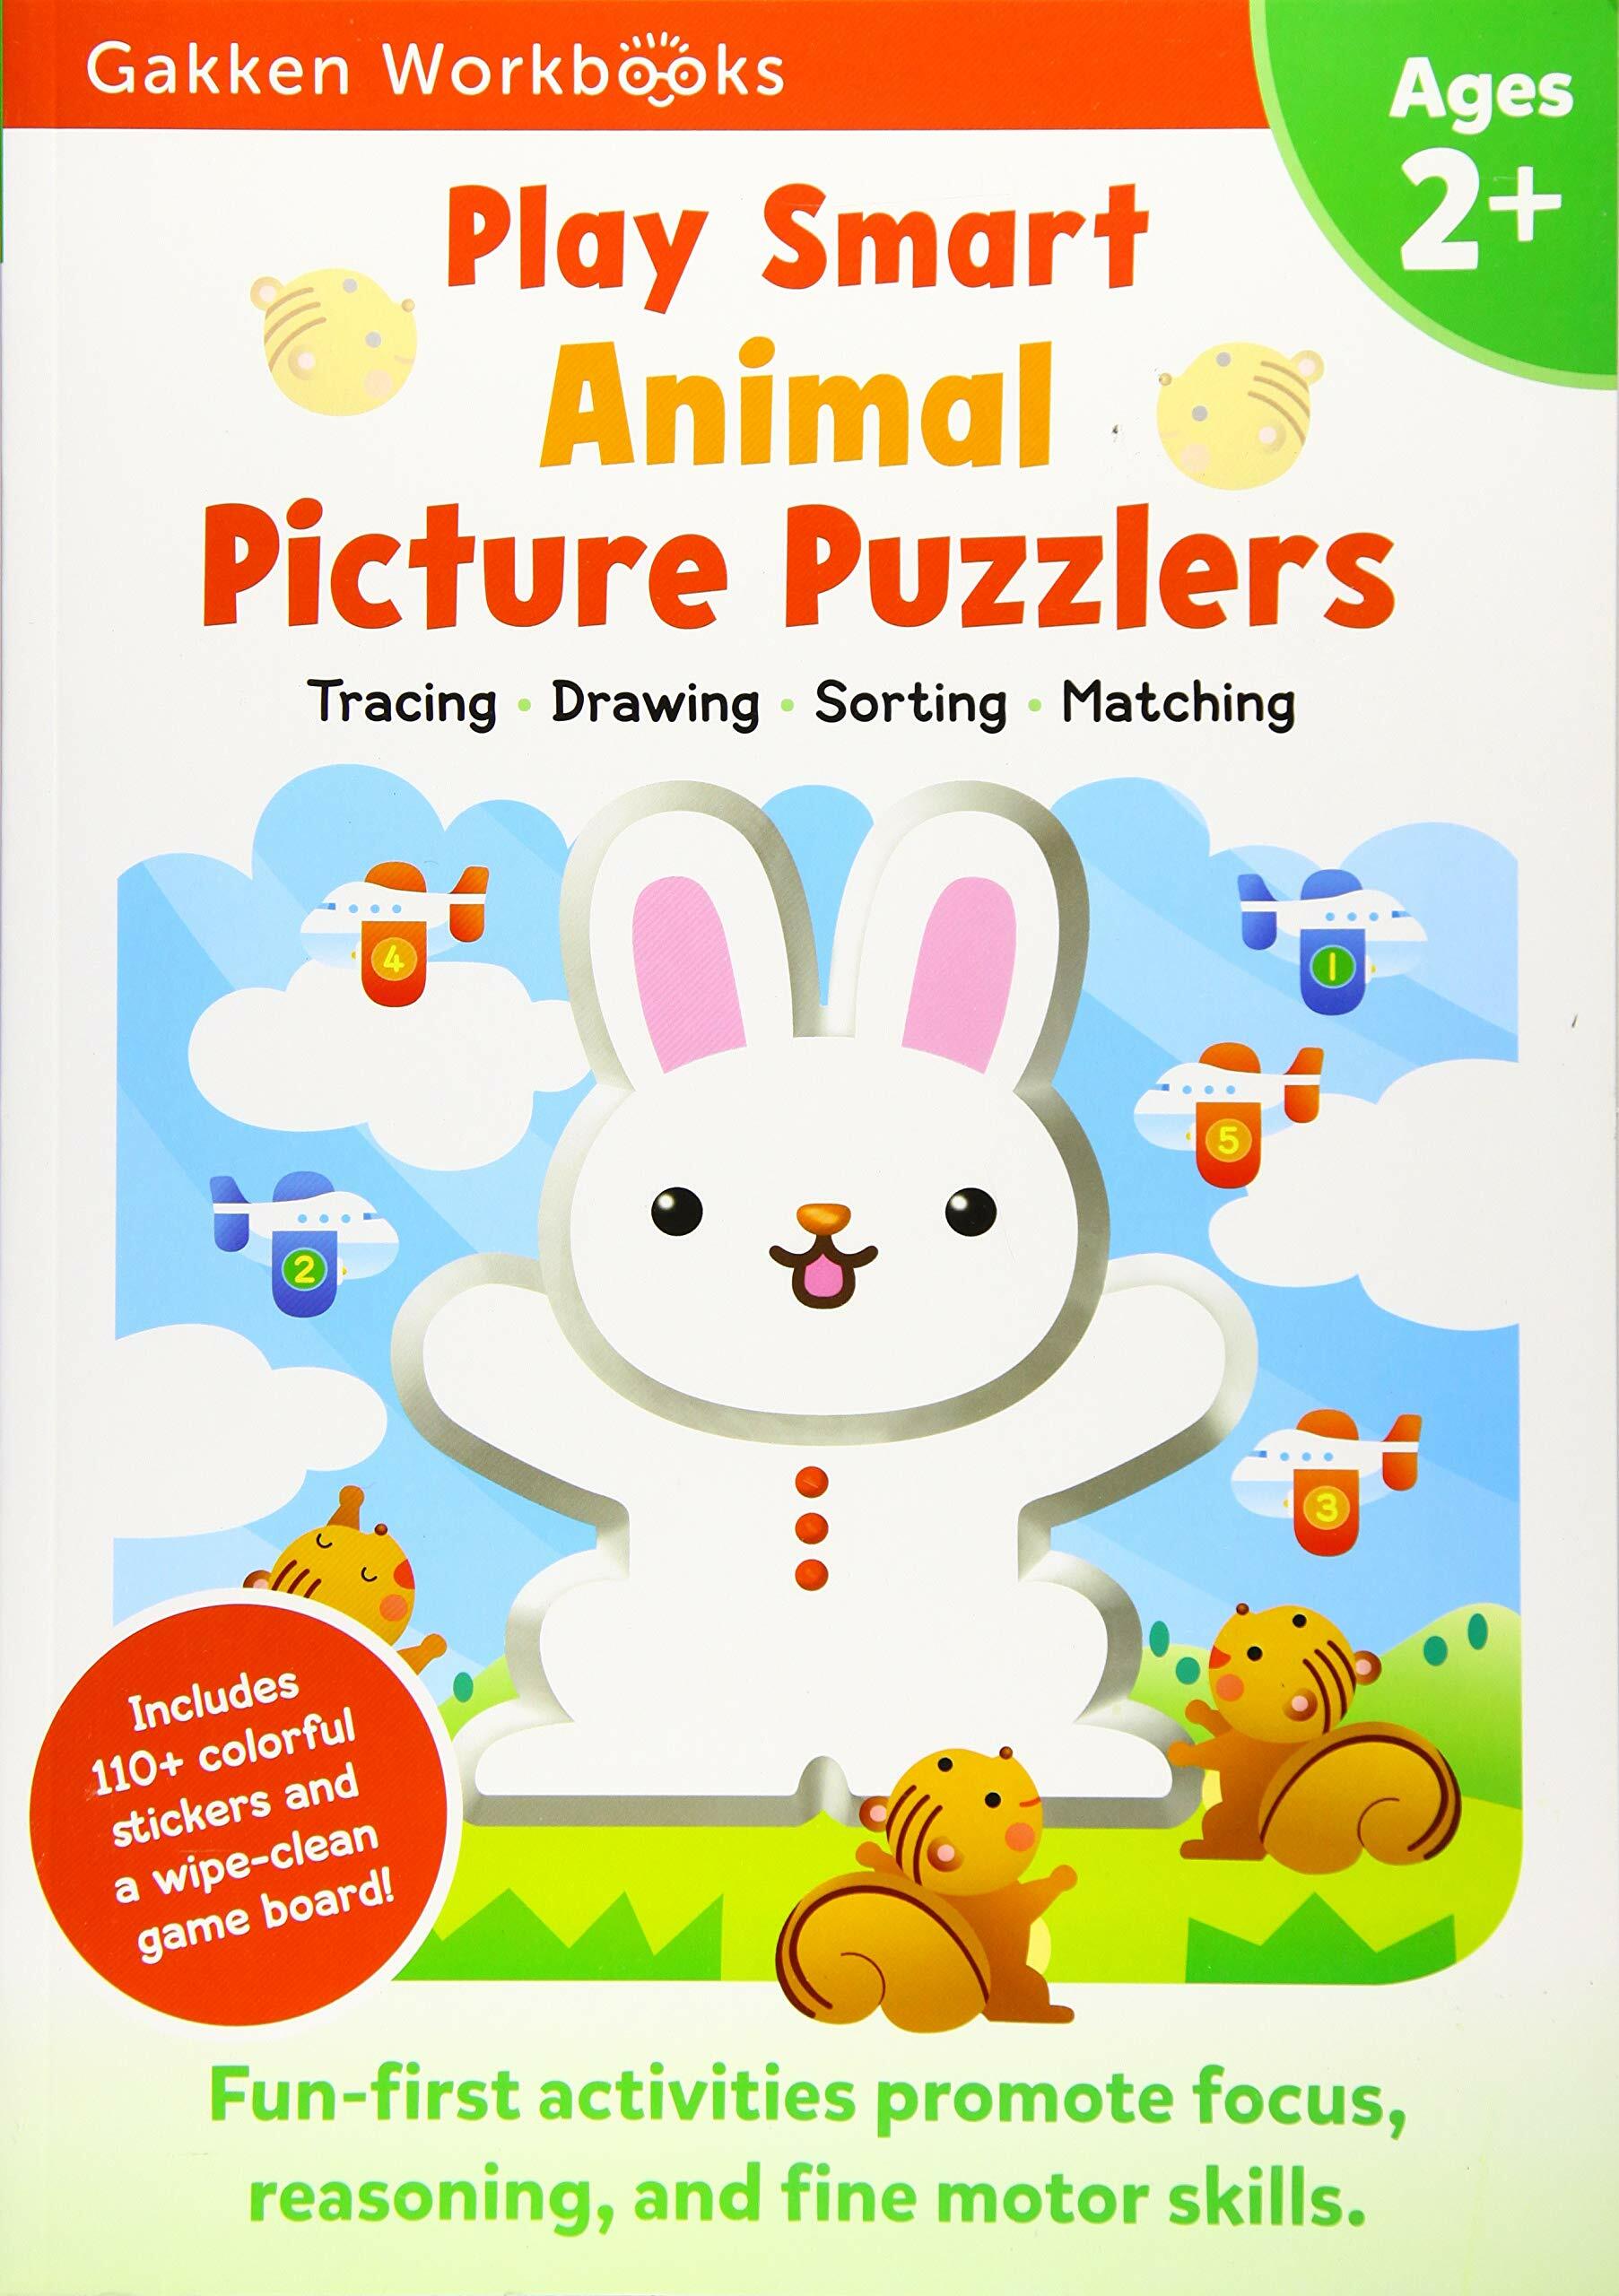 Play Smart Animal Picture Puzzlers Age 2+: Preschool Activity Workbook with Stickers for Toddlers Ages 2, 3, 4: Learn Using Favorite Themes: Tracing, (Paperback)